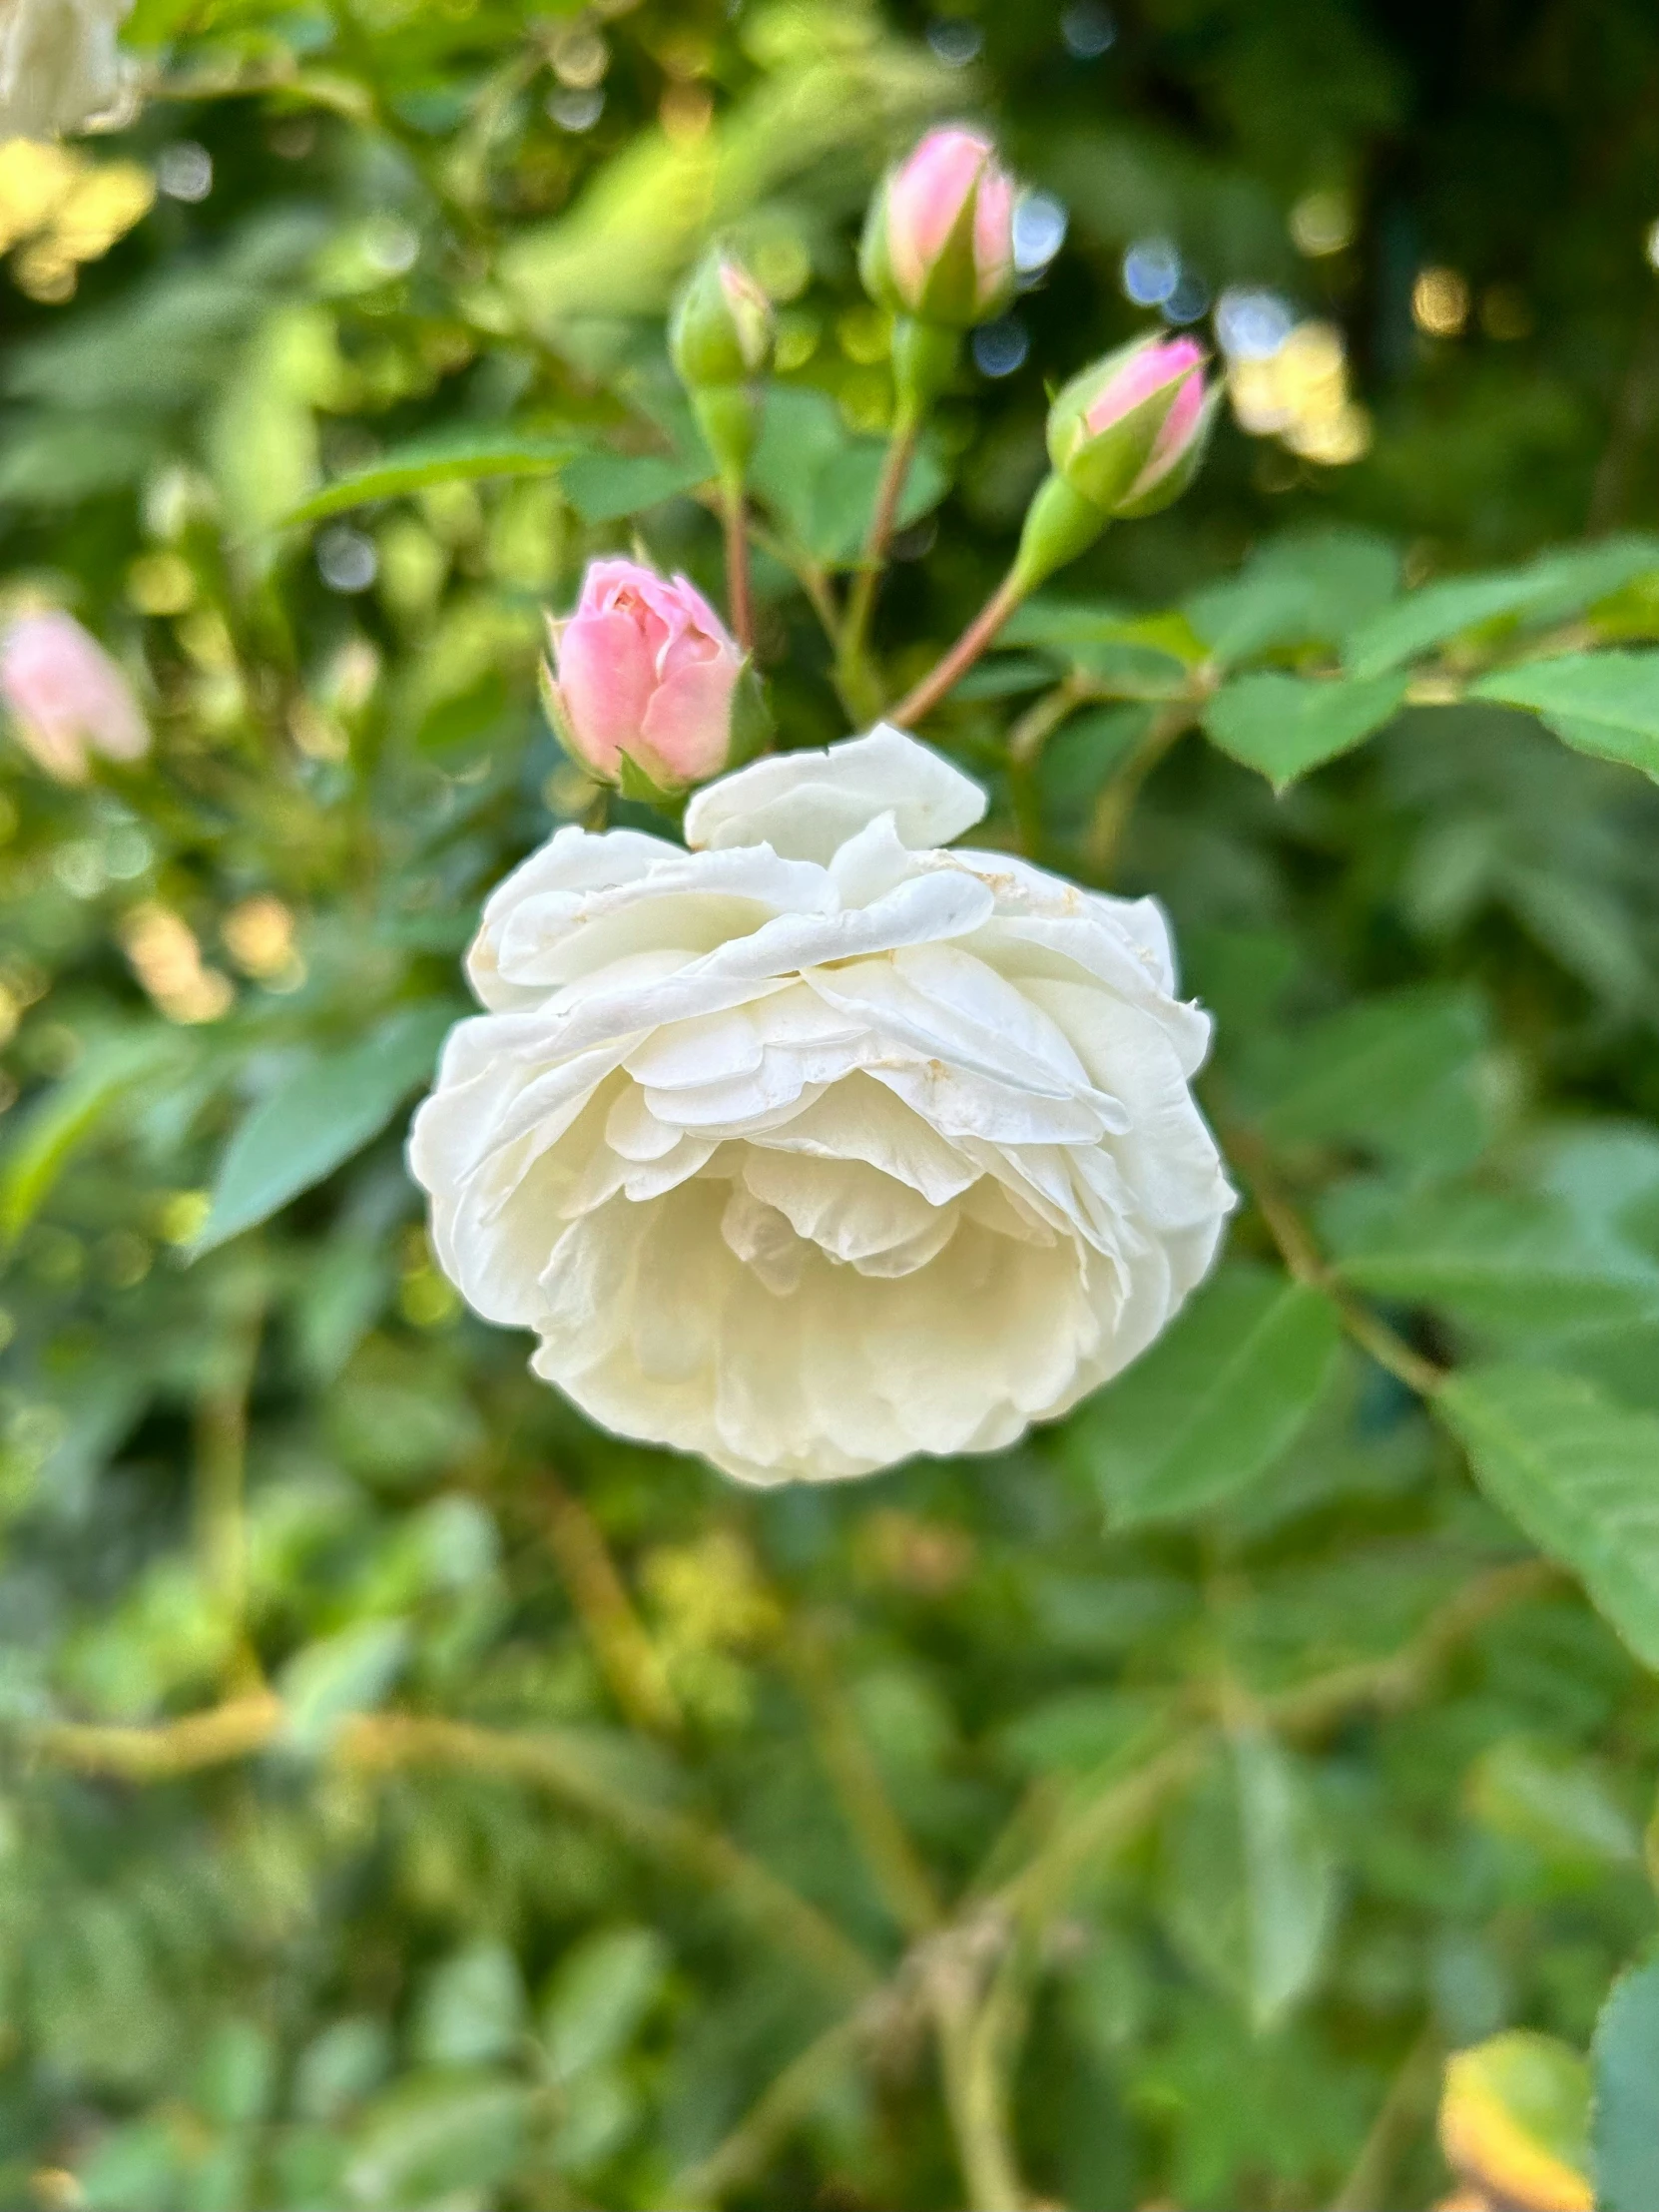 this is a white rose with pink flowers